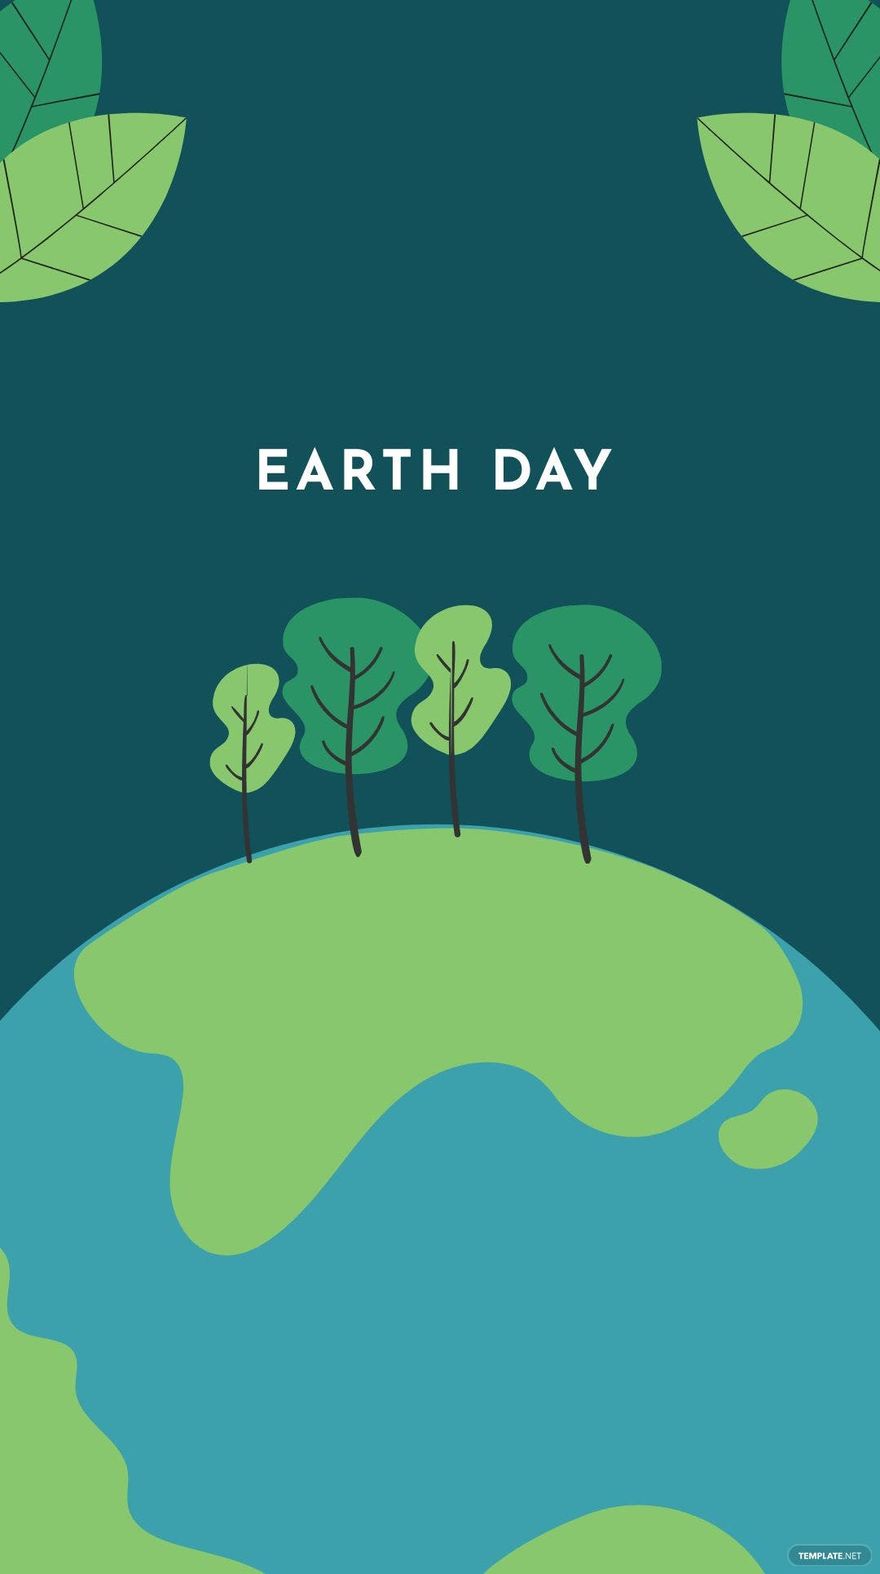 Earth Day iPhone Background in PDF, Illustrator, PSD, EPS, SVG, JPG, PNG